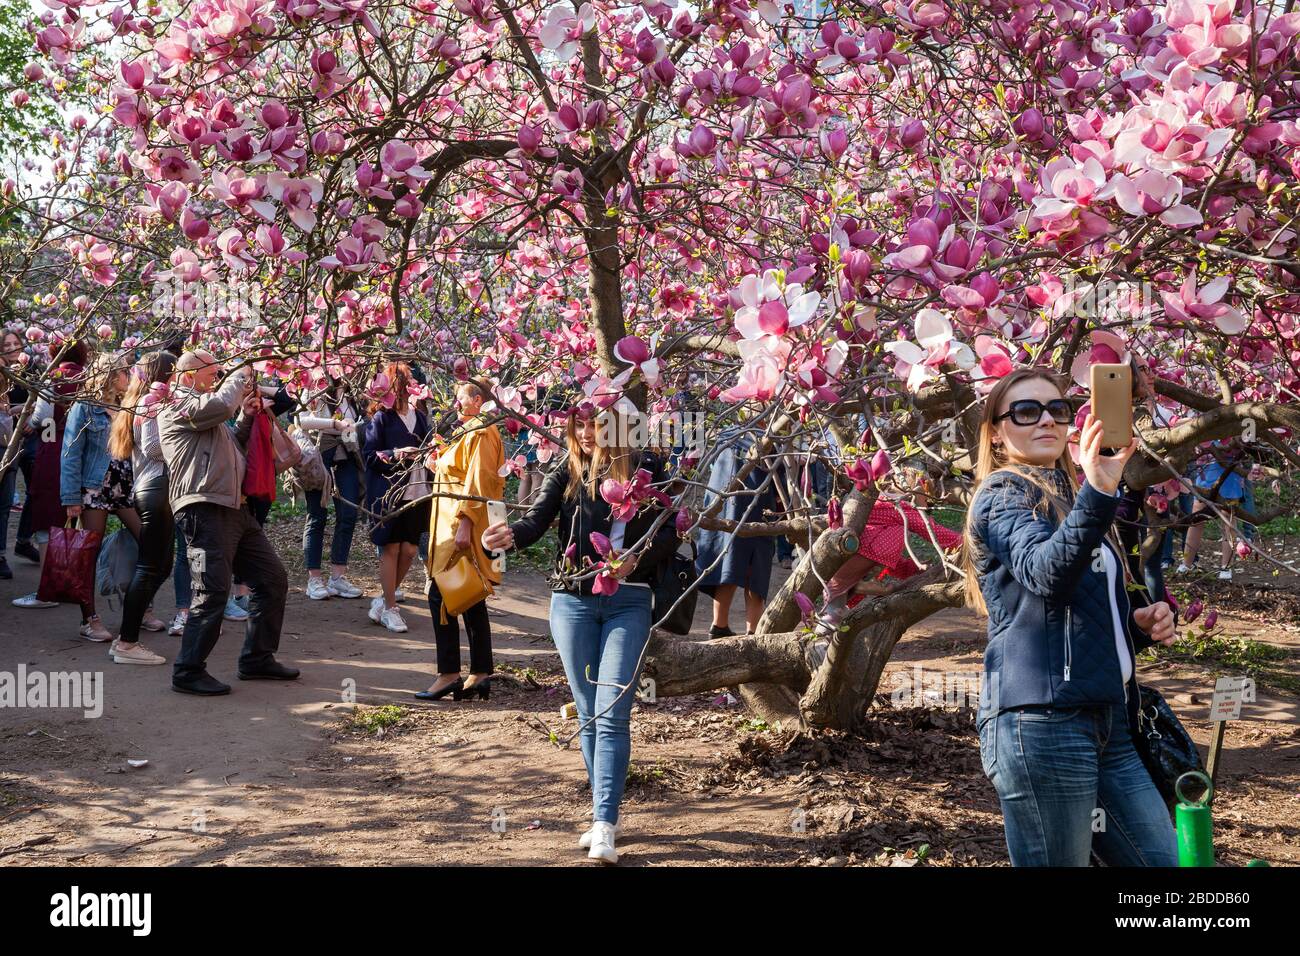 24.04.2019, Kiew, , Ukraine - Women photographing themselves in front of tree blossoms in the Kiev Botanical Garden. 00P190424D619CAROEX.JPG [MODEL RE Stock Photo